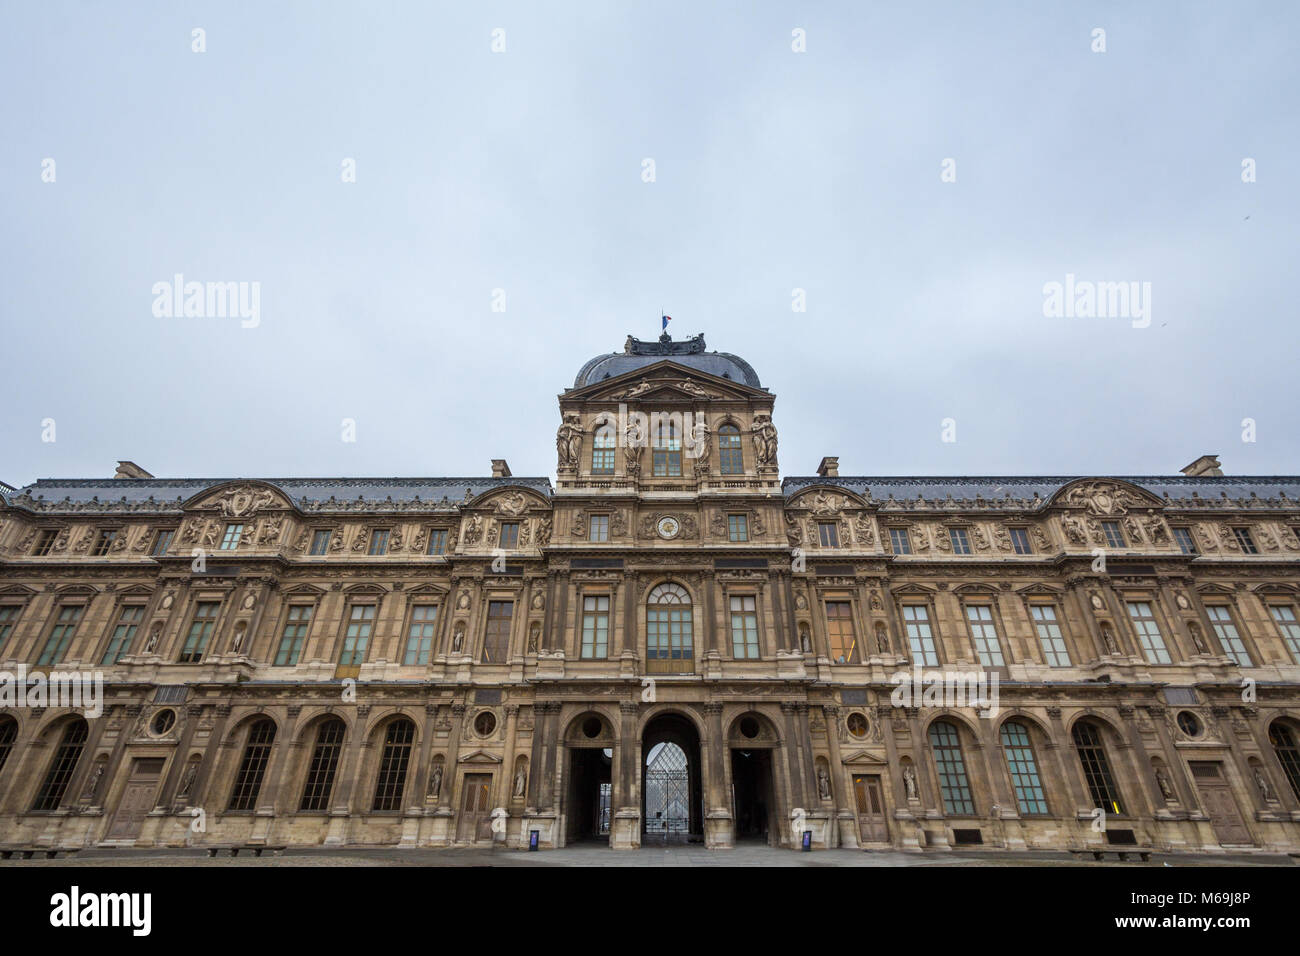 Courtyard of Louvre Palace (Palais du Louvre) in Paris, France, taken during a cloudy afternoon. This former royal palace is now one of the biggest ar Stock Photo